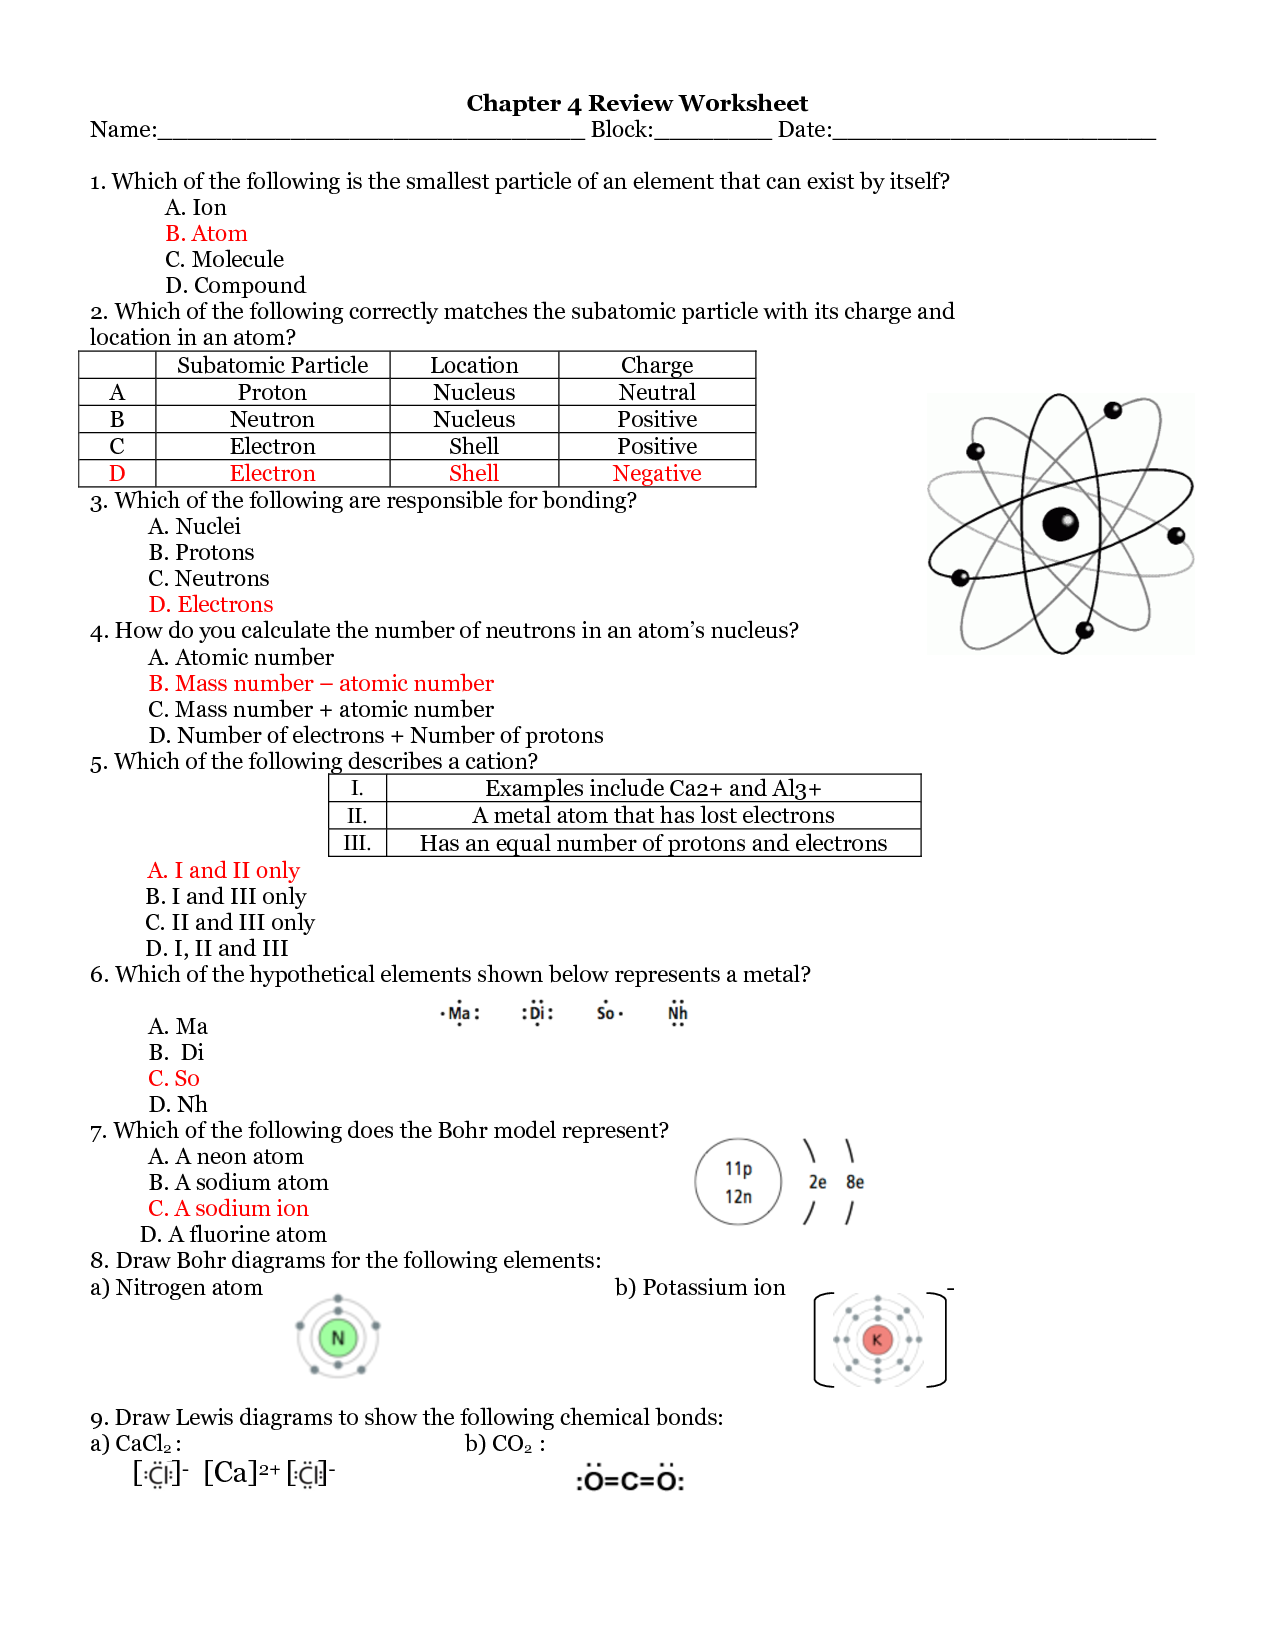 Atoms and Ions Worksheet Answer Key Image